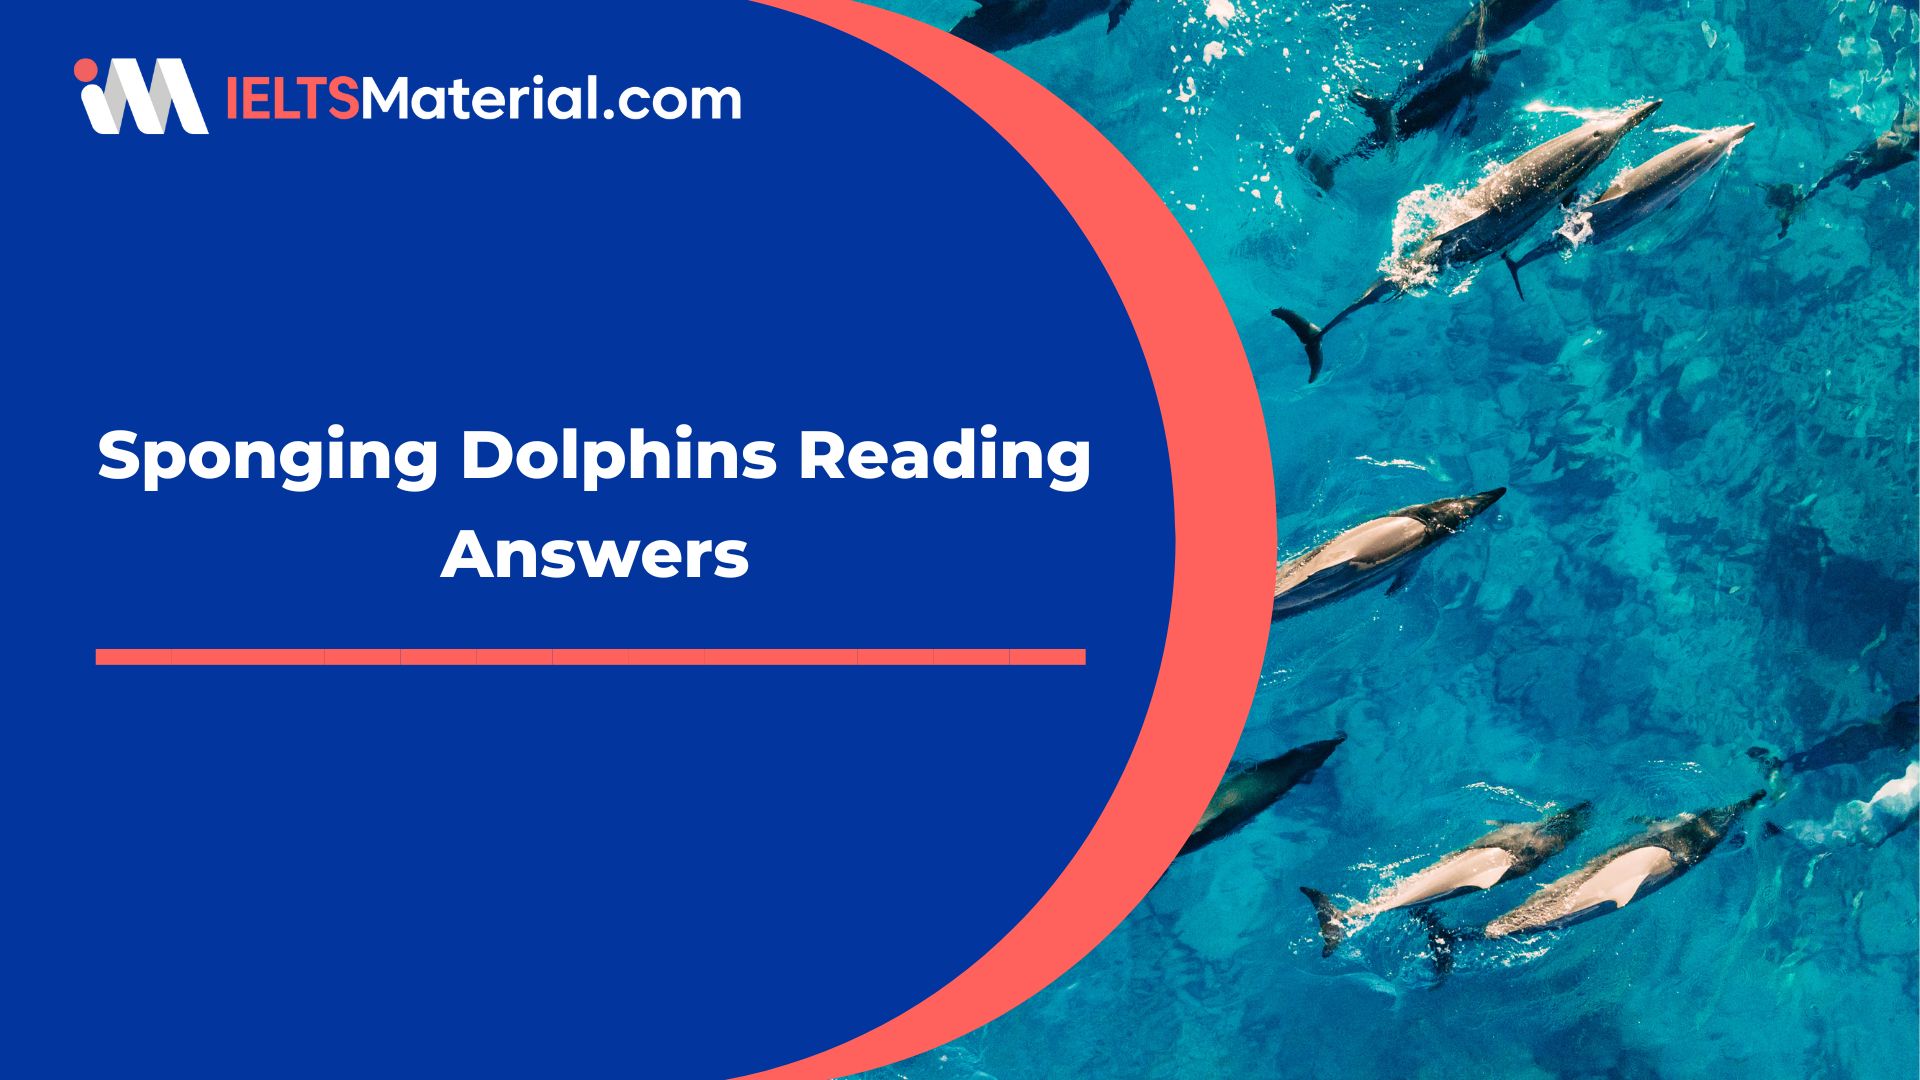 Sponging Dolphins Reading Answers